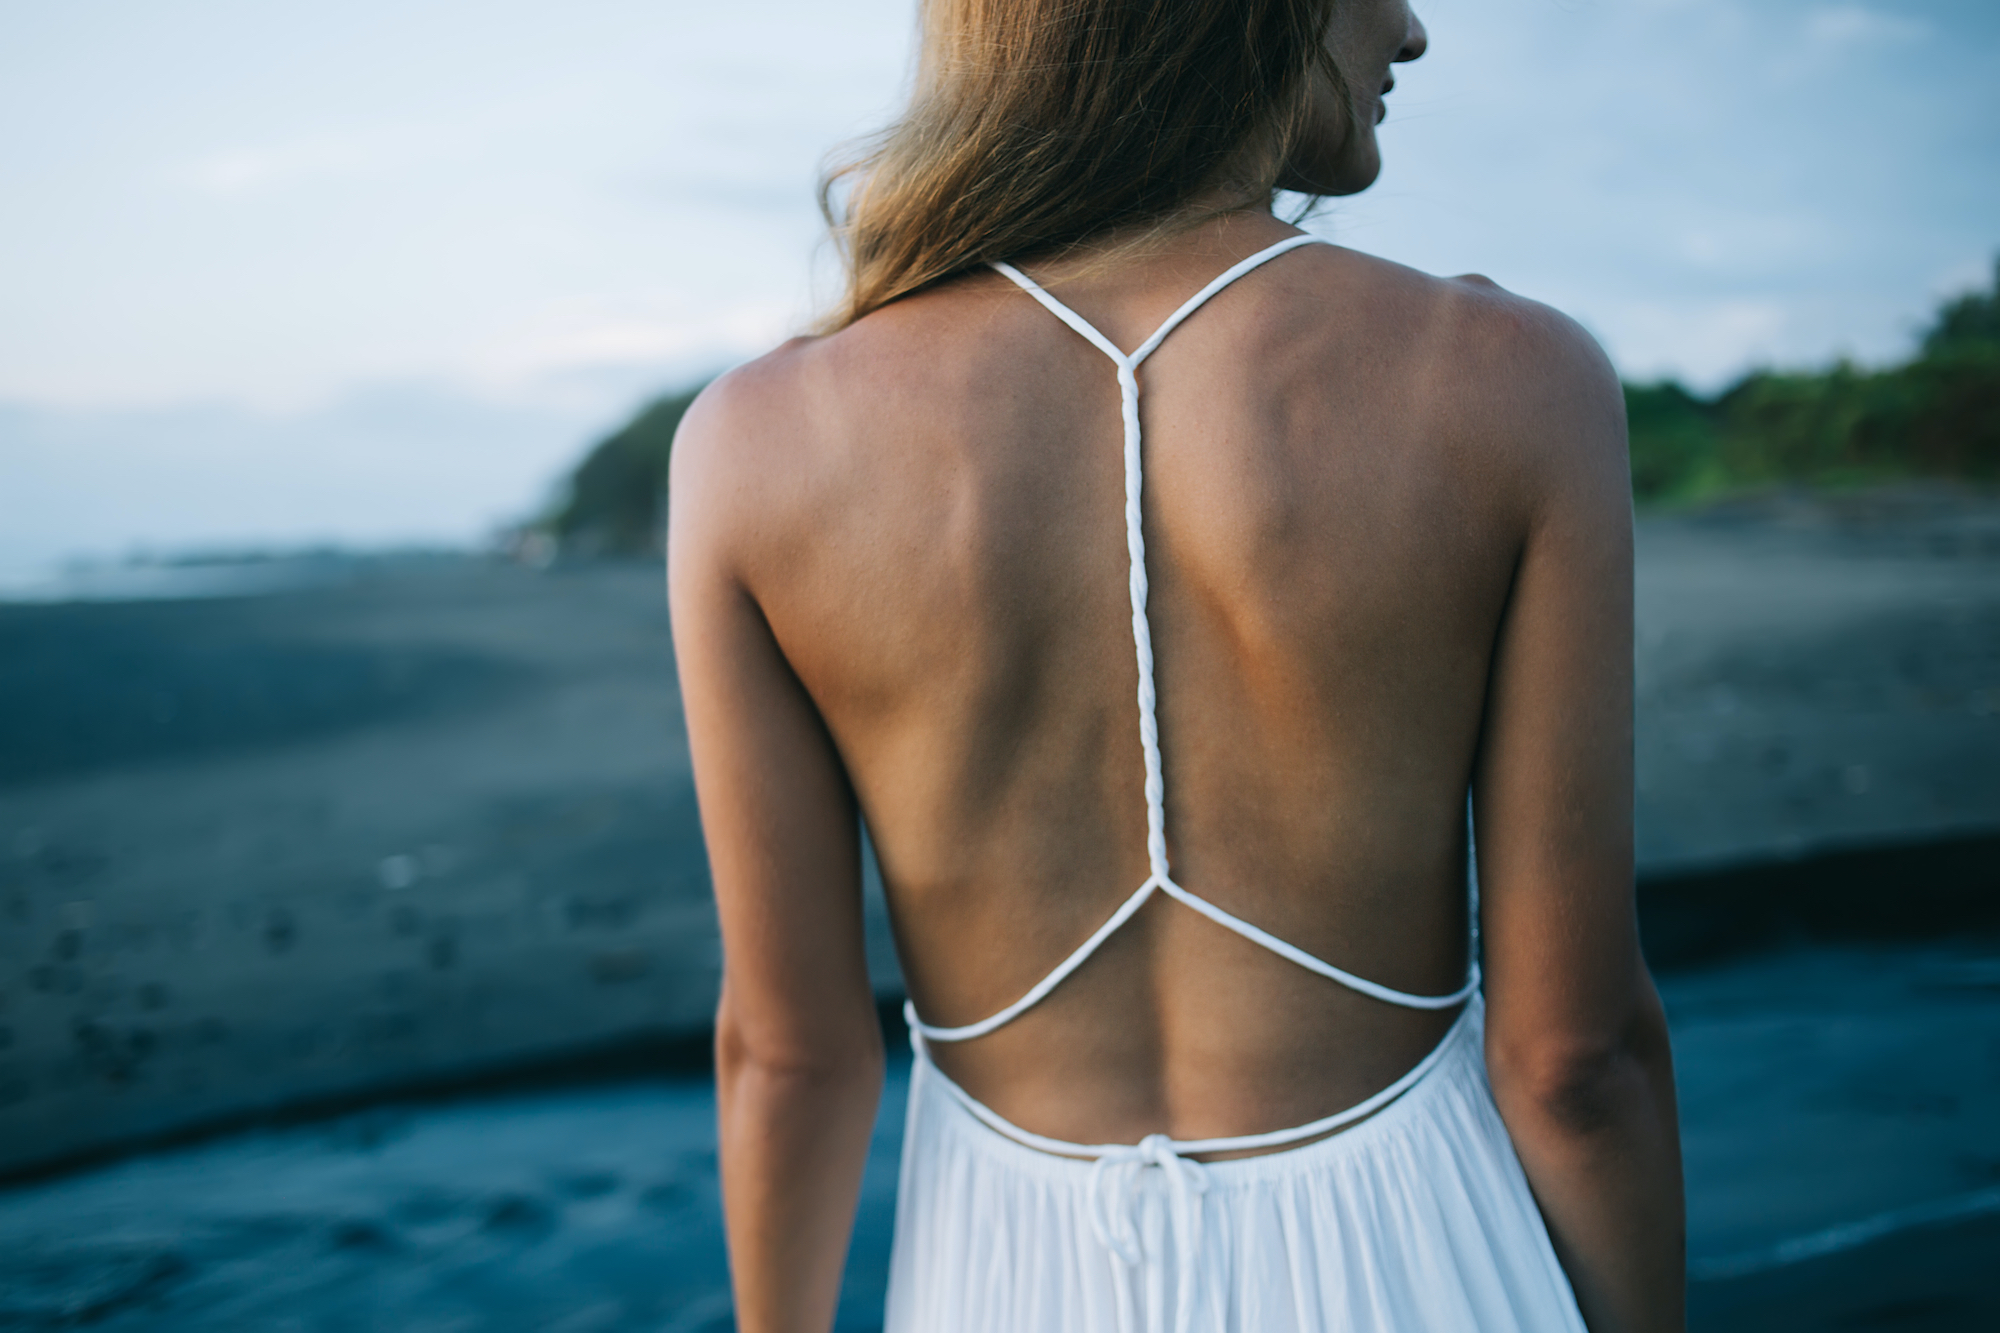 17 Sultry Open-Back Dresses That Are Super Easy To Wear